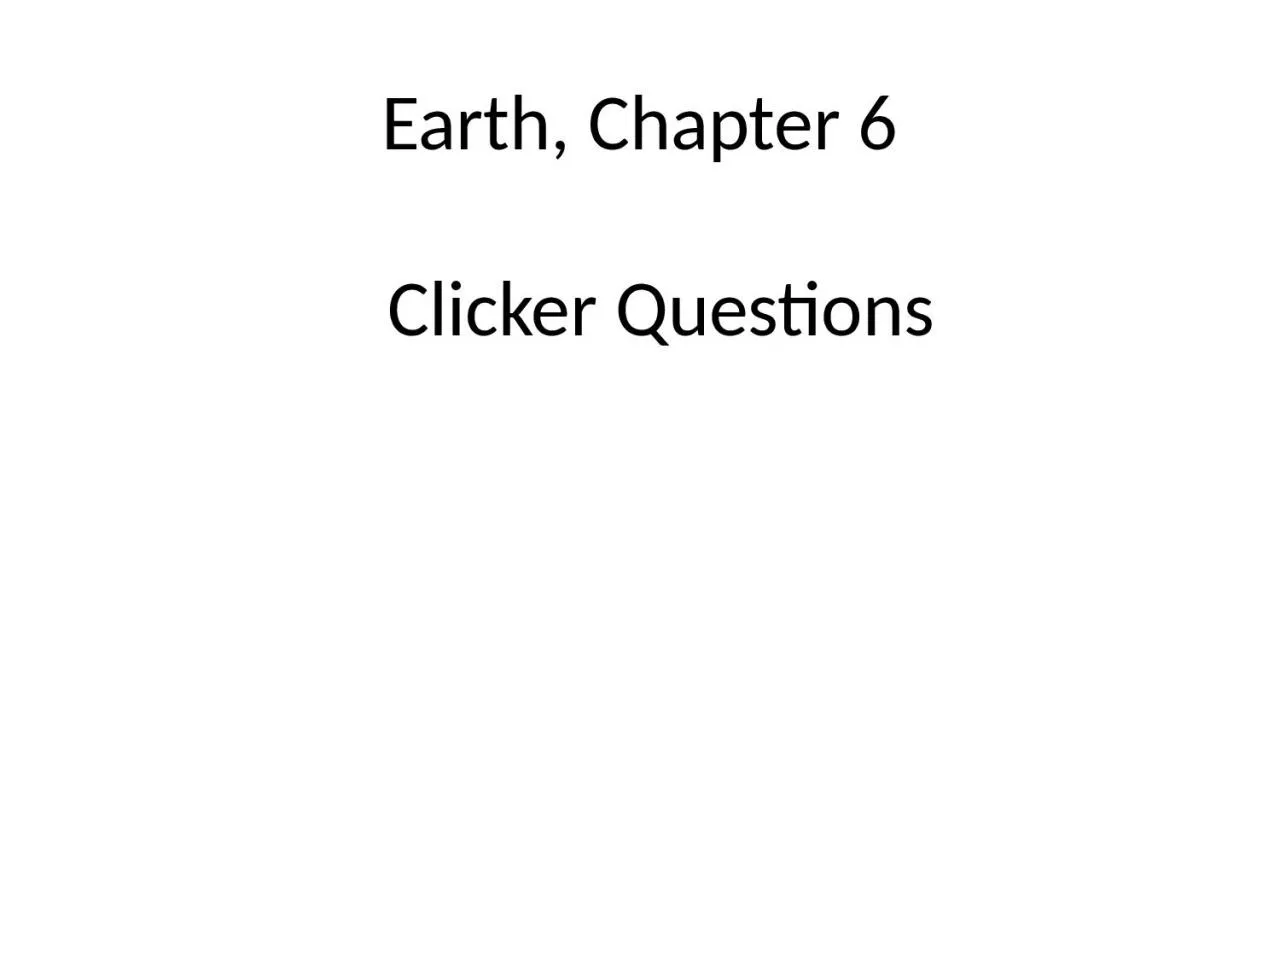 Earth, Chapter 6 Clicker Questions